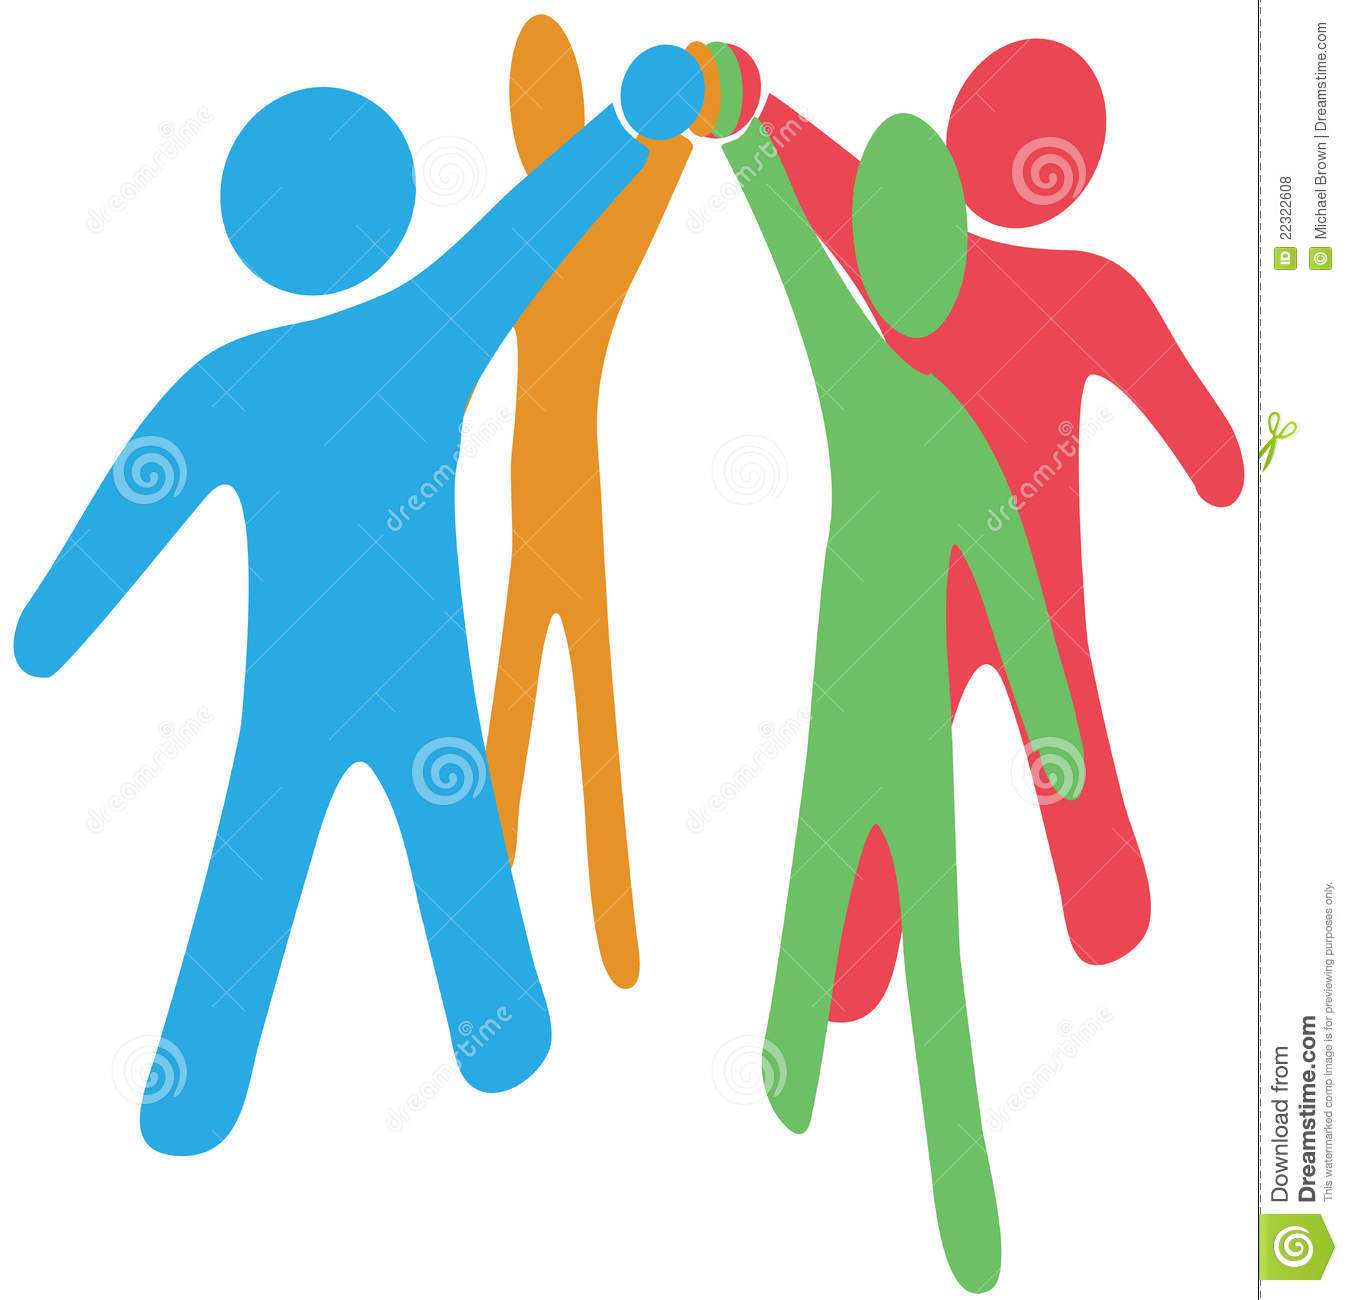 People Collaborate Team Up Join Hands Together Royalty Free Stock